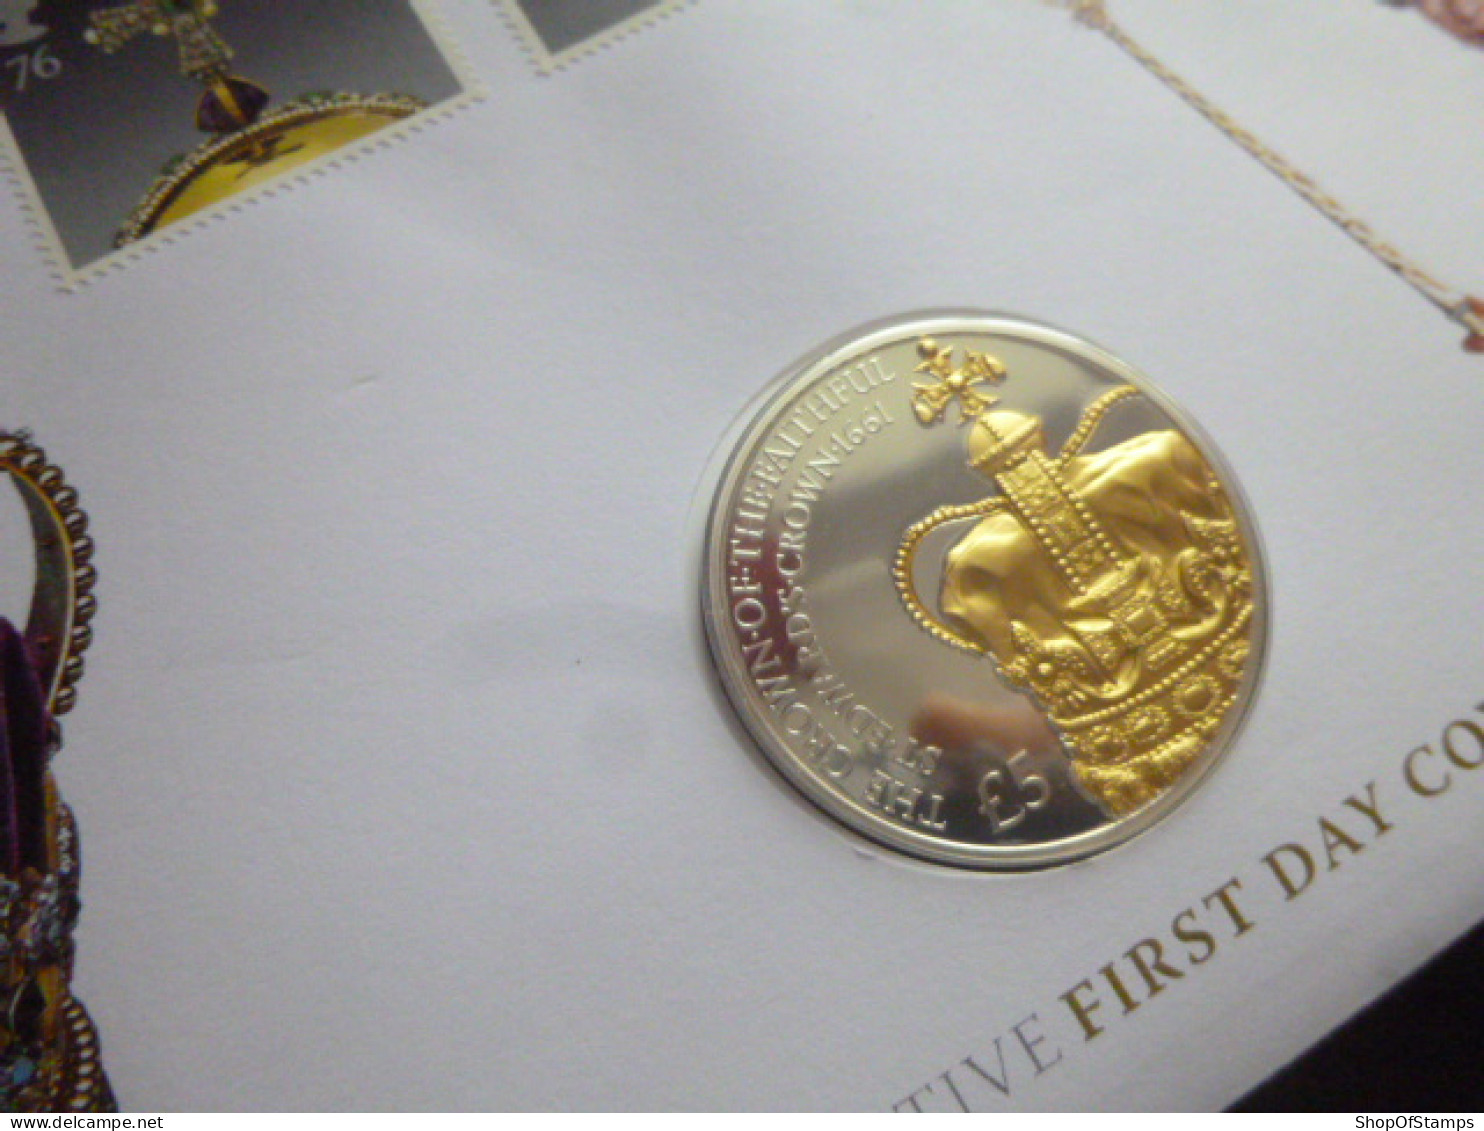 GREAT BRITAIN SG 3187+ 2011 CROWN JEWELS 350TH ANNIVERSARY With GUERNSEY COIN FDC - Otros & Sin Clasificación